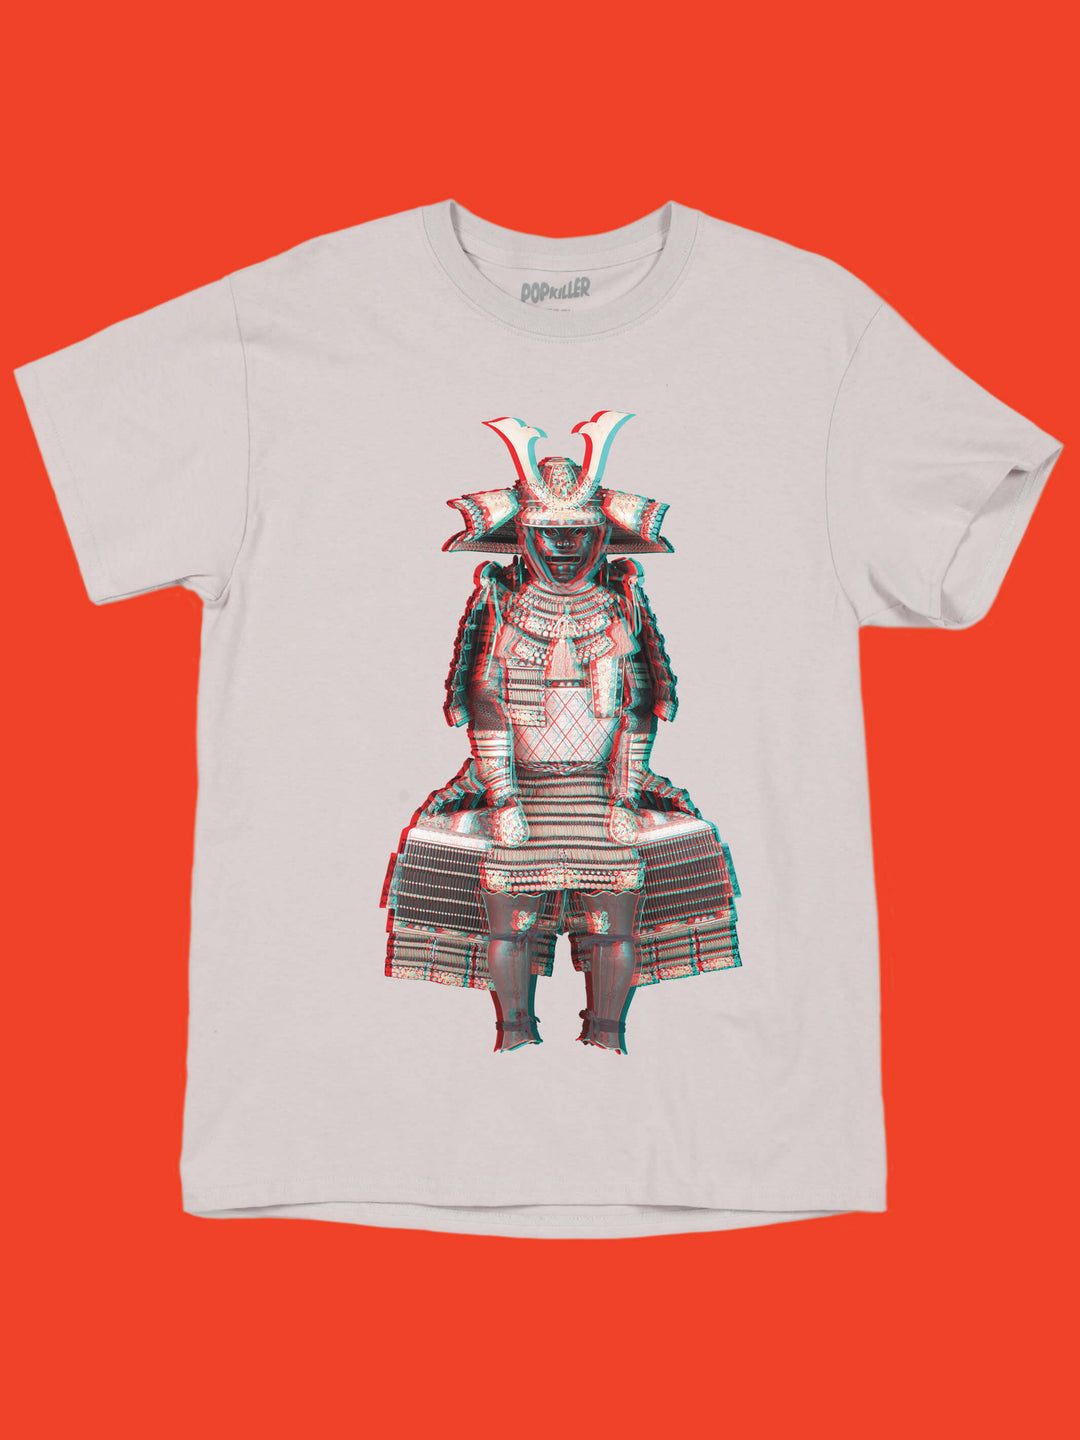 Grey graphic tee with samurai armor by Los Angeles brand Popkiller.